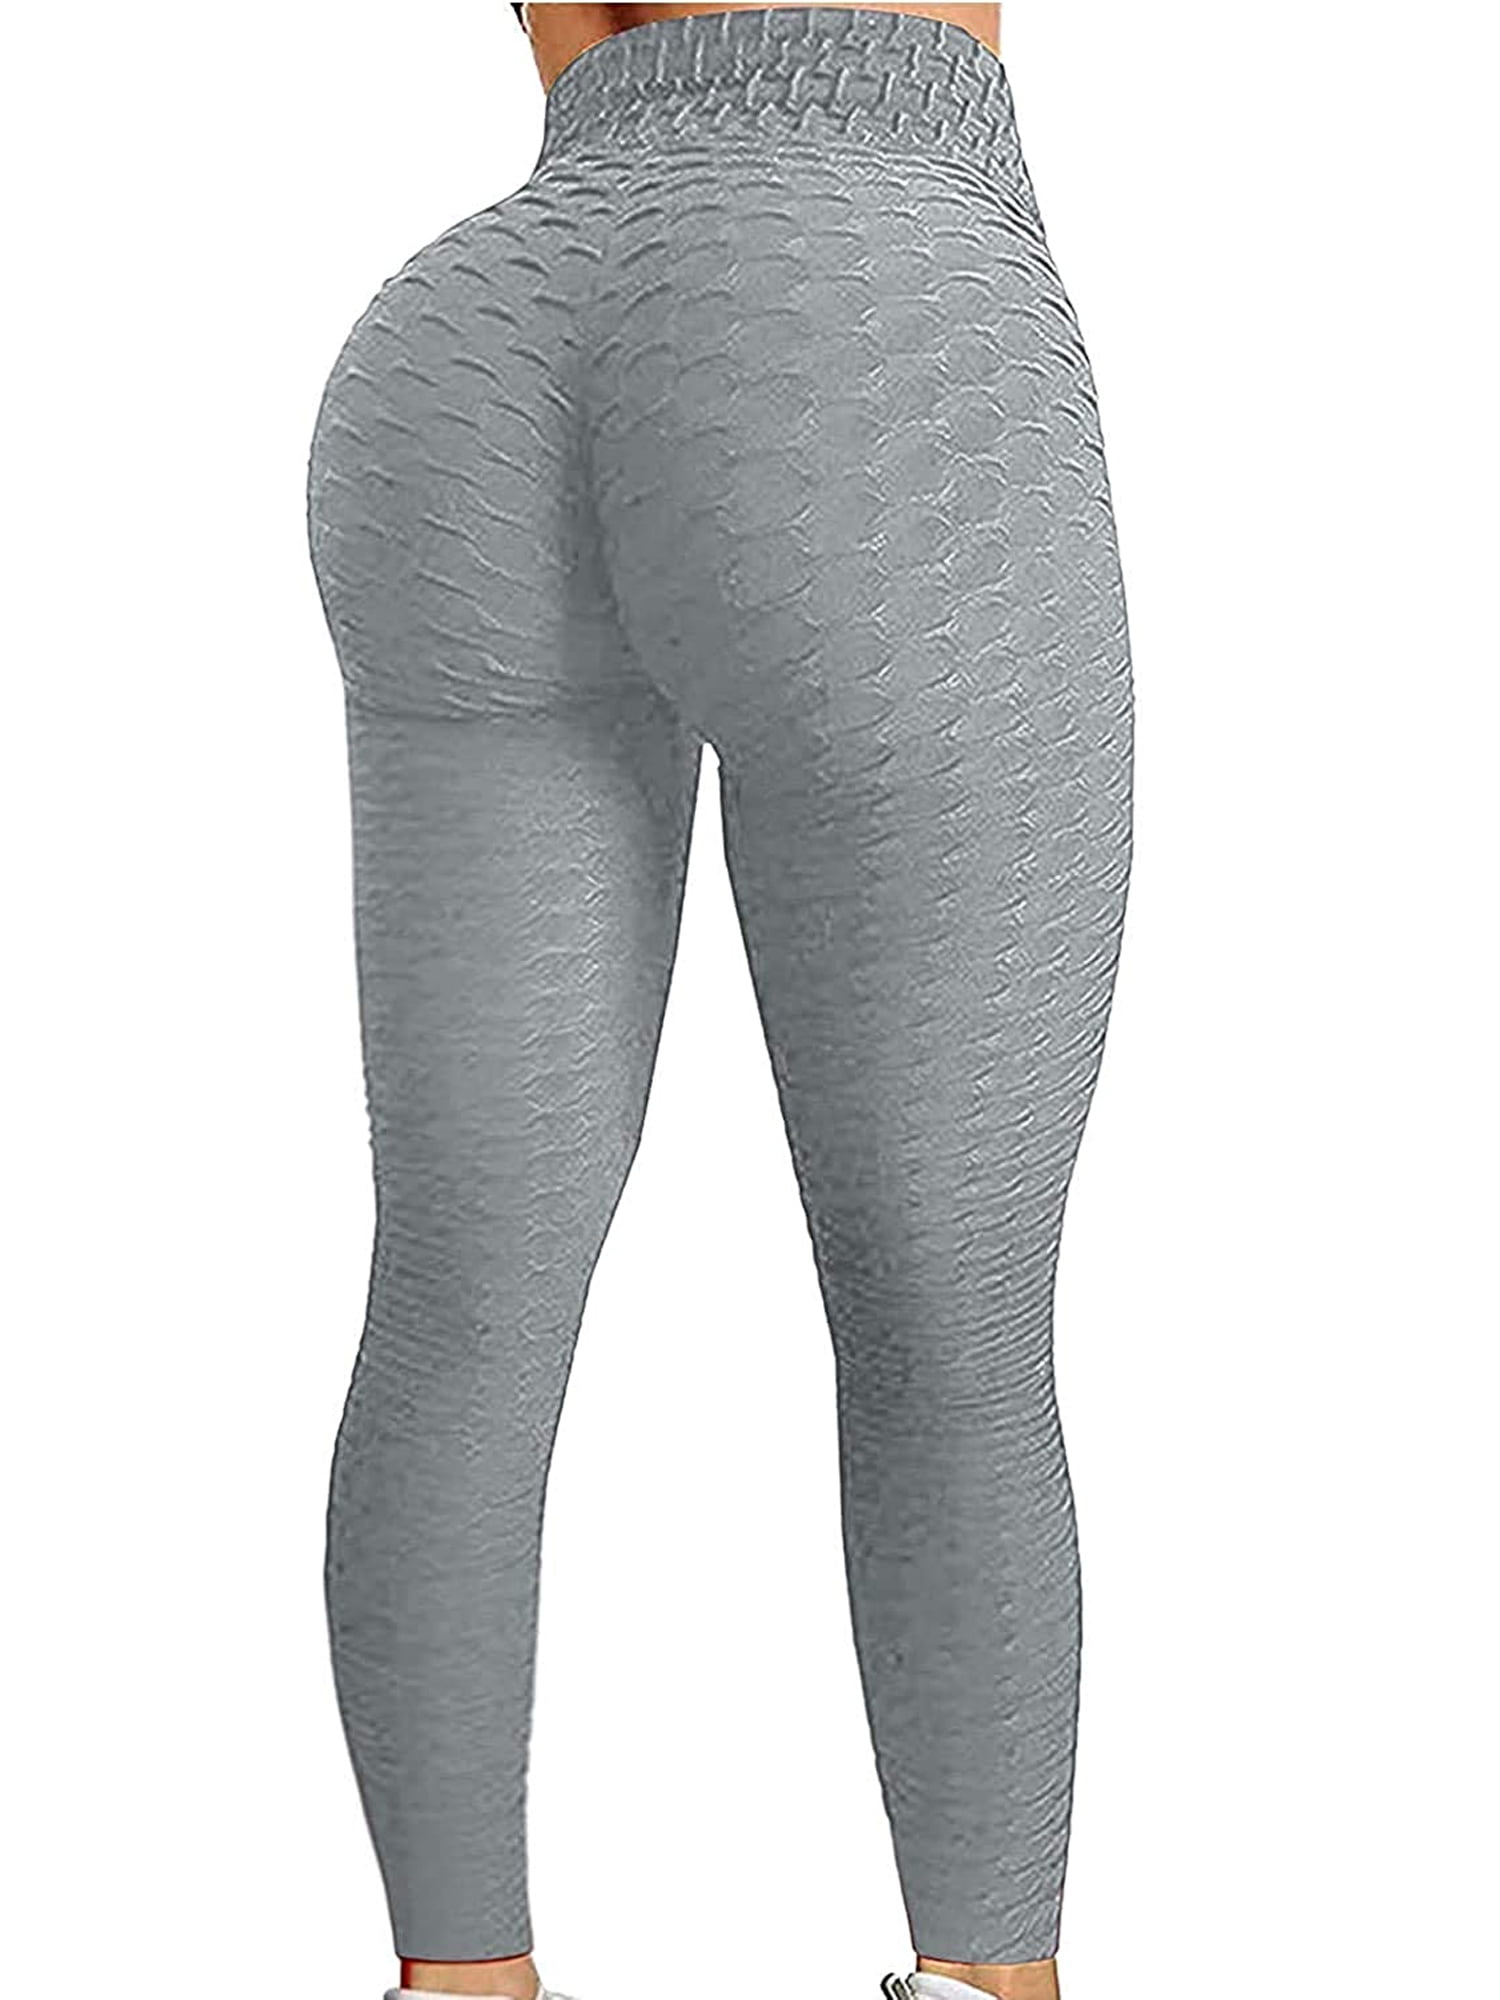 Canrulo Women Booty Legging Yoga Pants Bubble Butt Lifting Workout Tights  Grey M